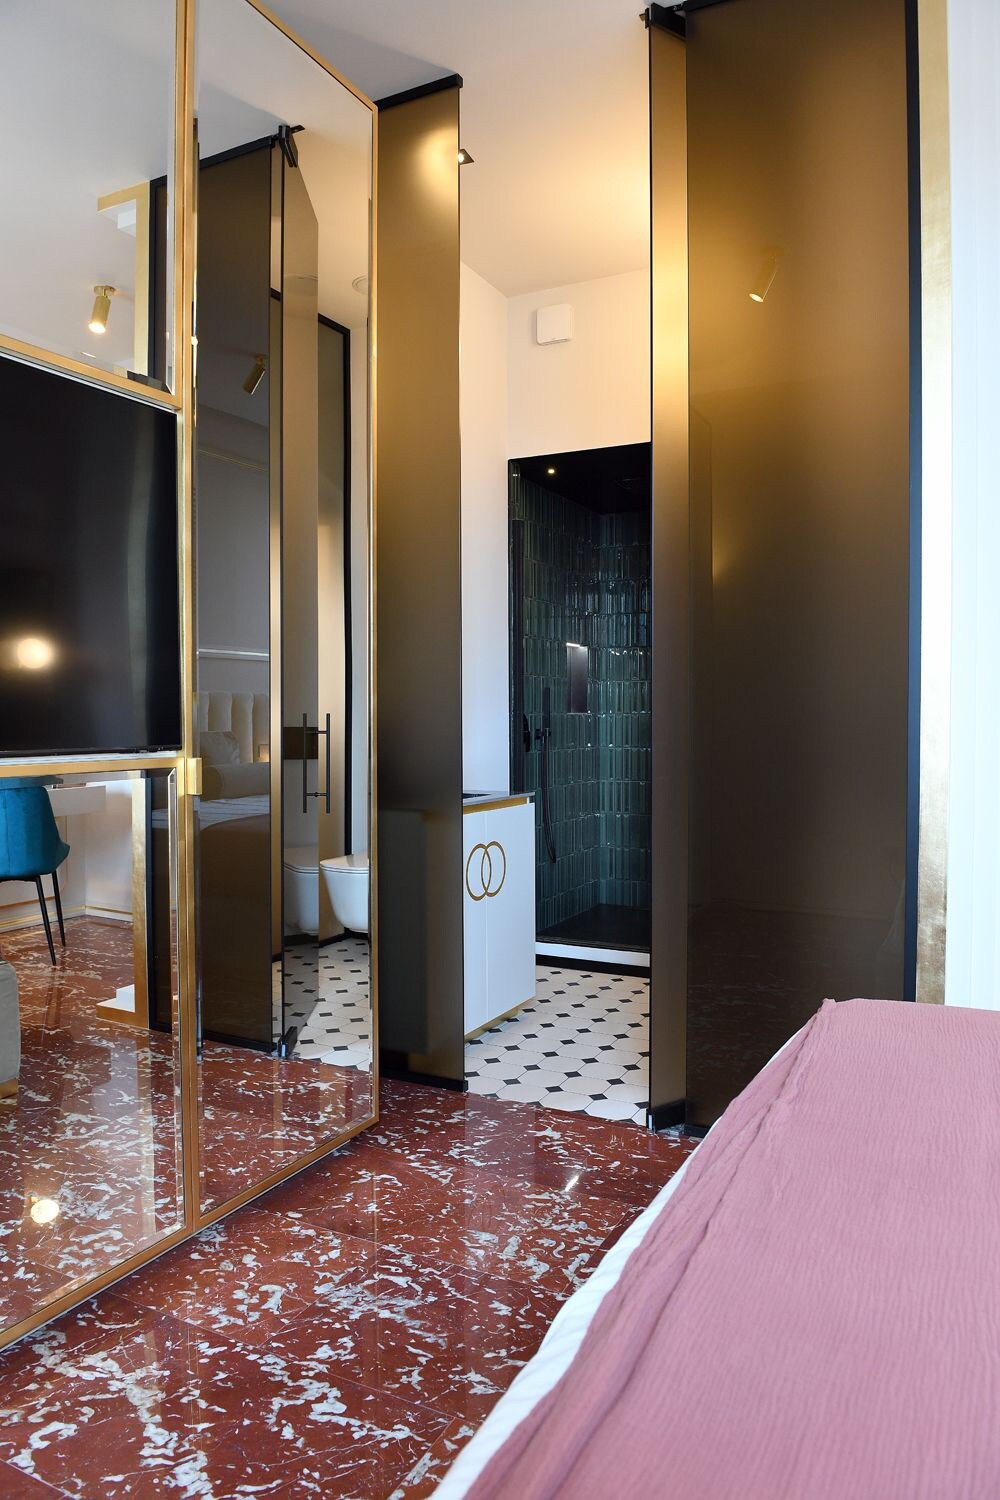 Suite 3 minutes' walk from the Duomo cathedral